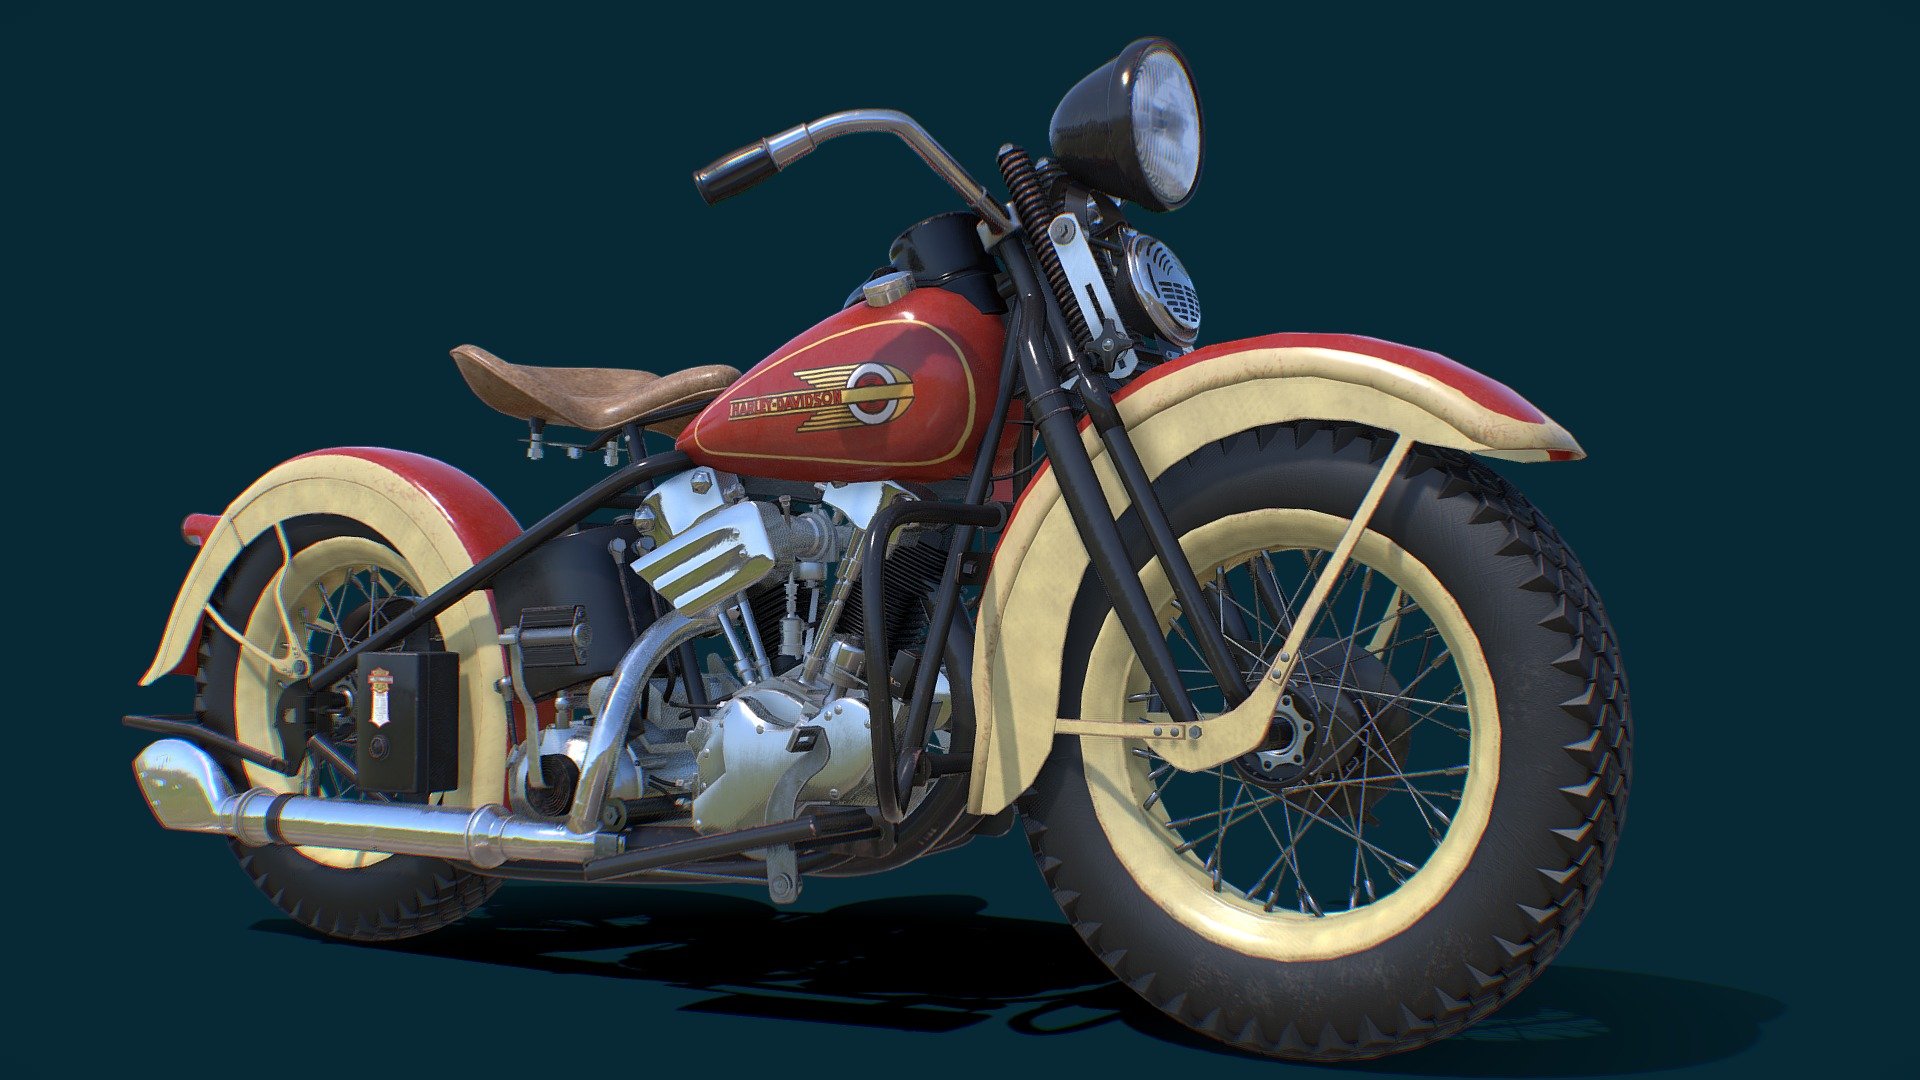 An iconic motorcycle which I made in Blender and then textures in Adobe Substance Painter 3d model